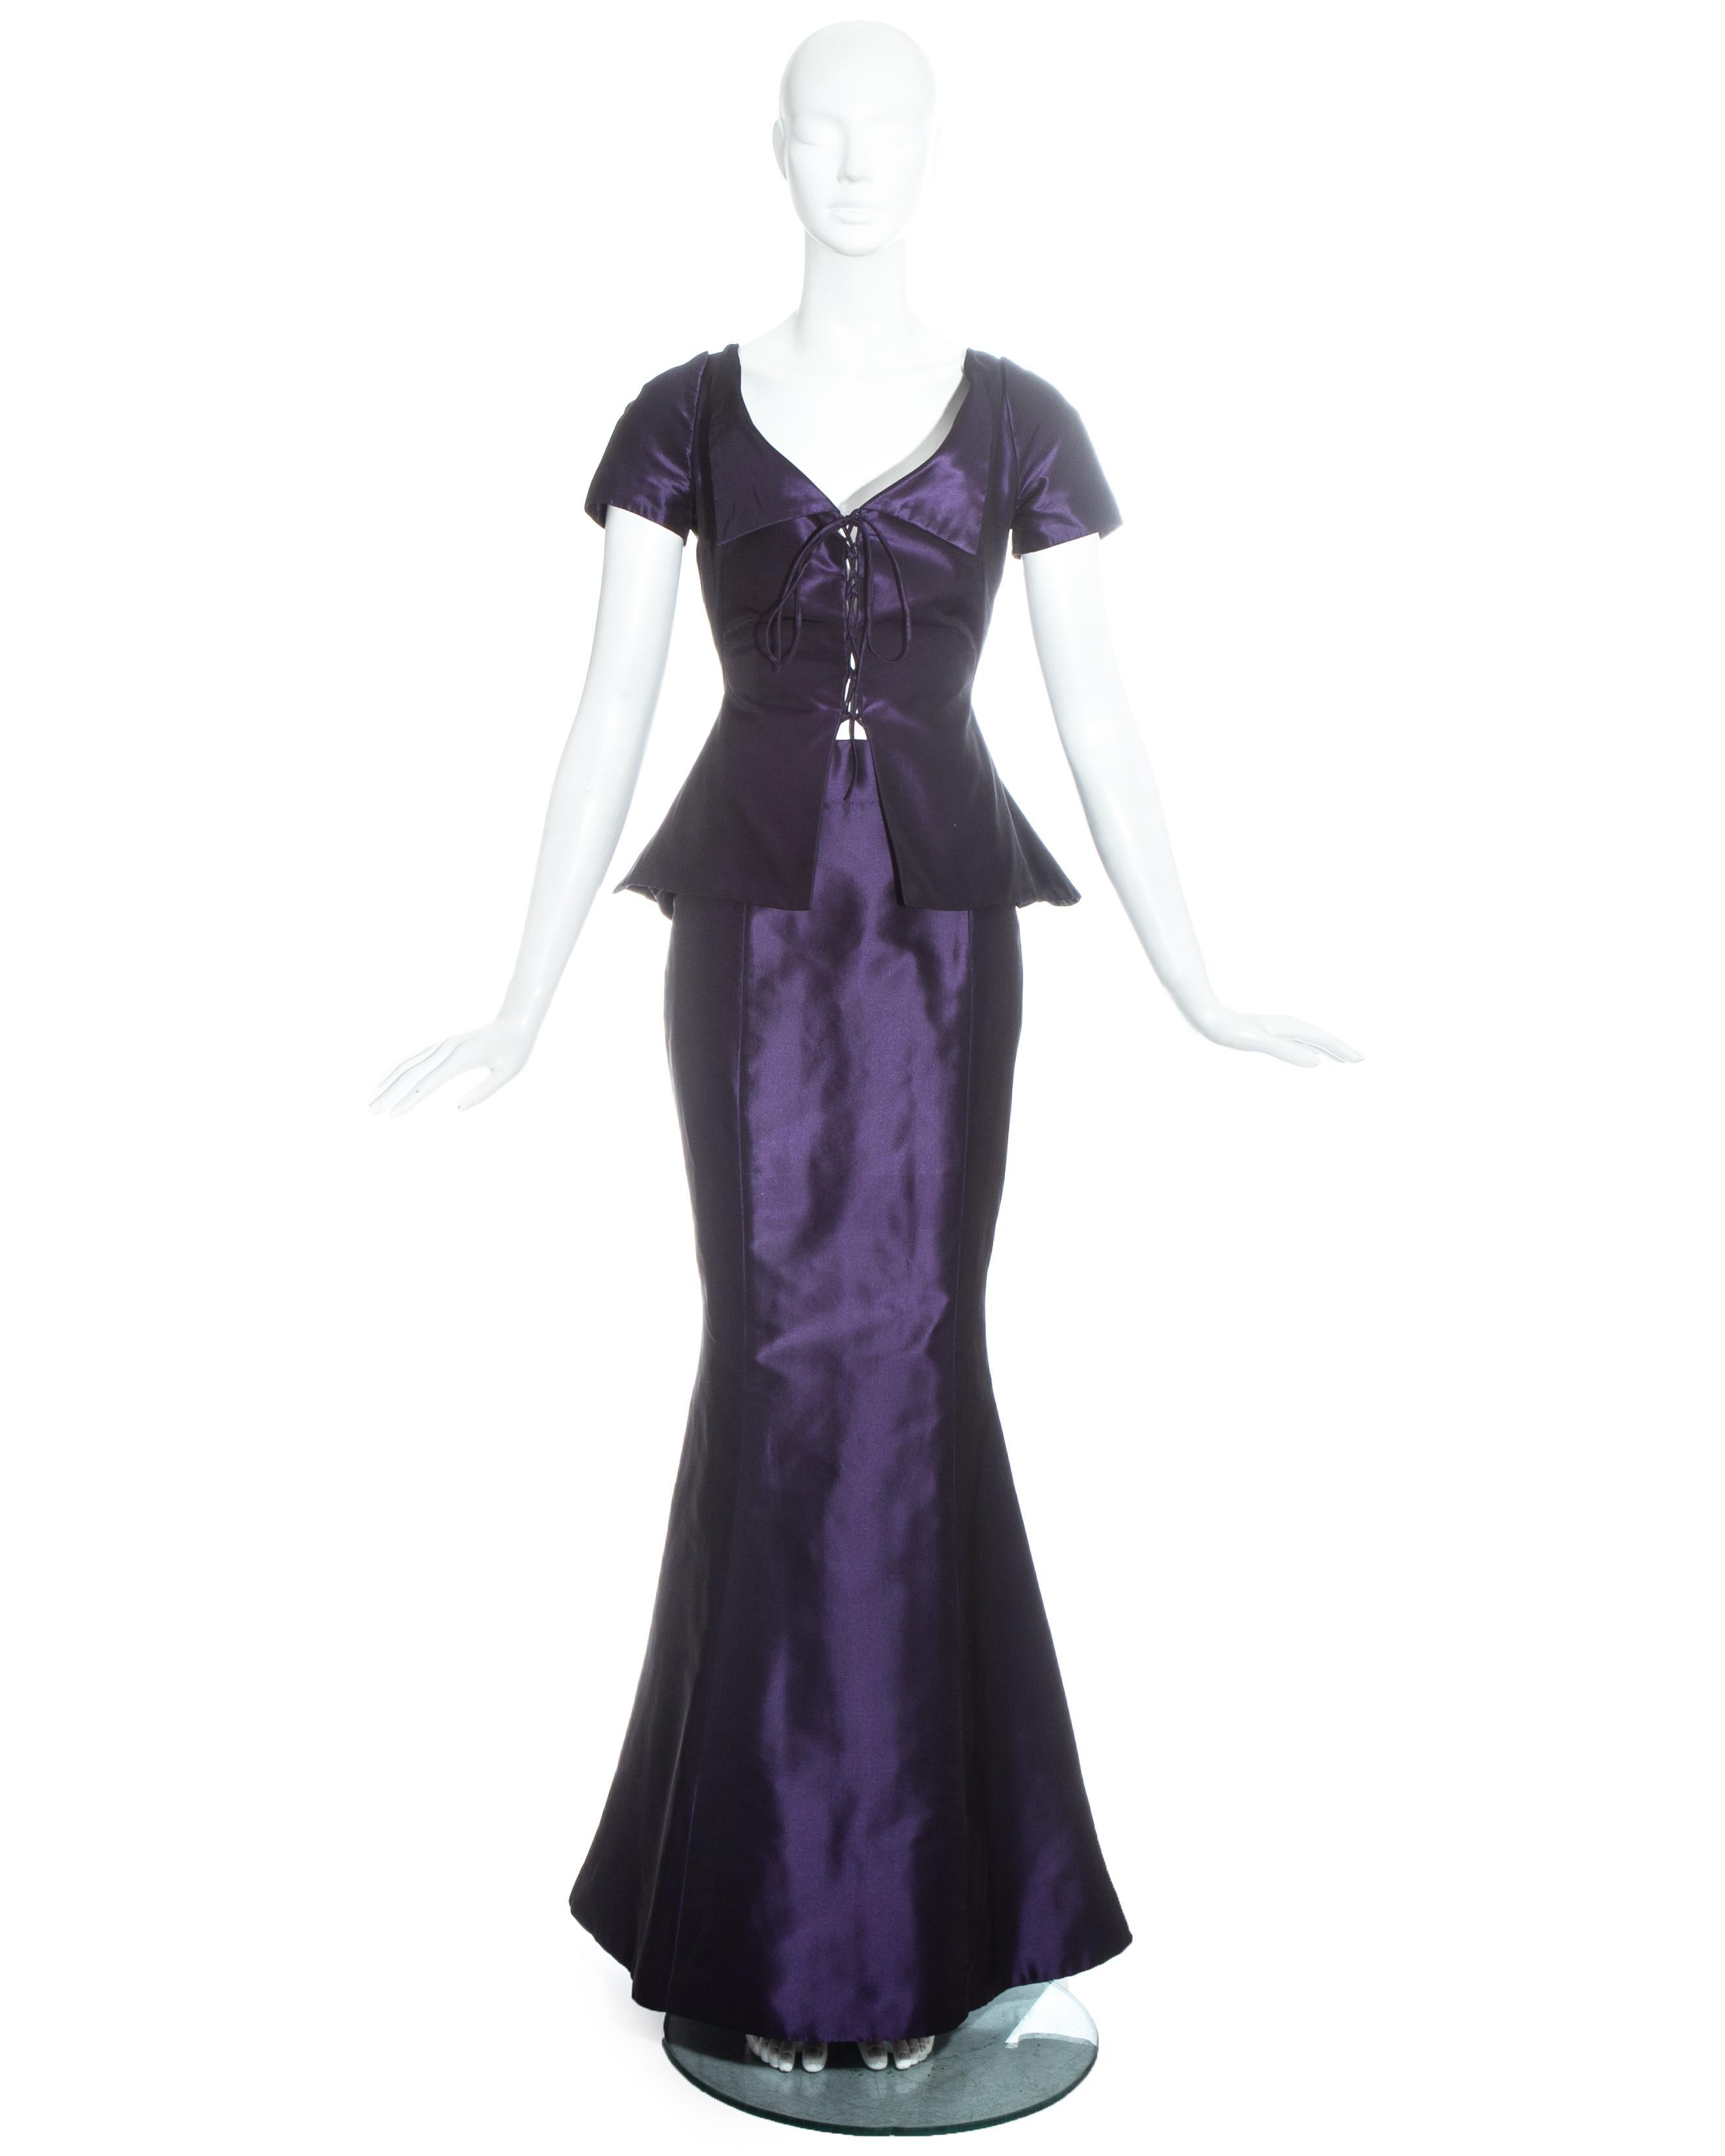 Vivienne Westwood Couture purple silk taffeta evening ensemble. High waisted hip hugging mermaid maxi skirt and pleated corset top with lace up fastening. 

c. 1997